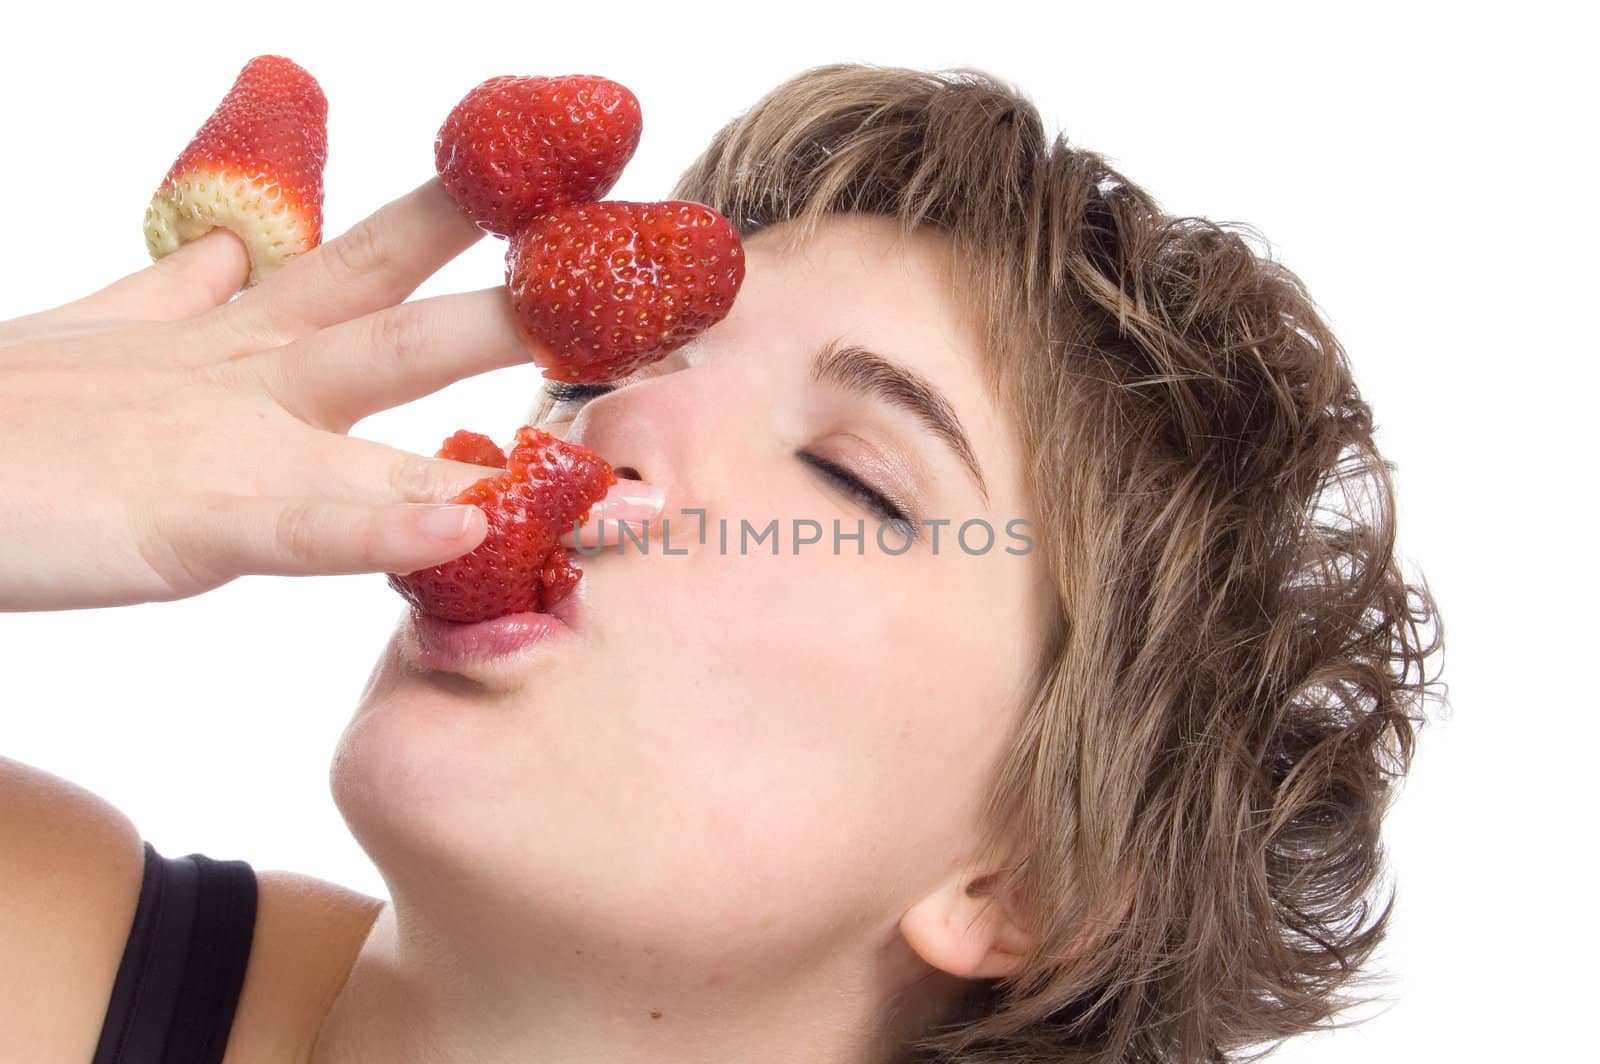 Sexy girl with red strawberry isolated on white background

